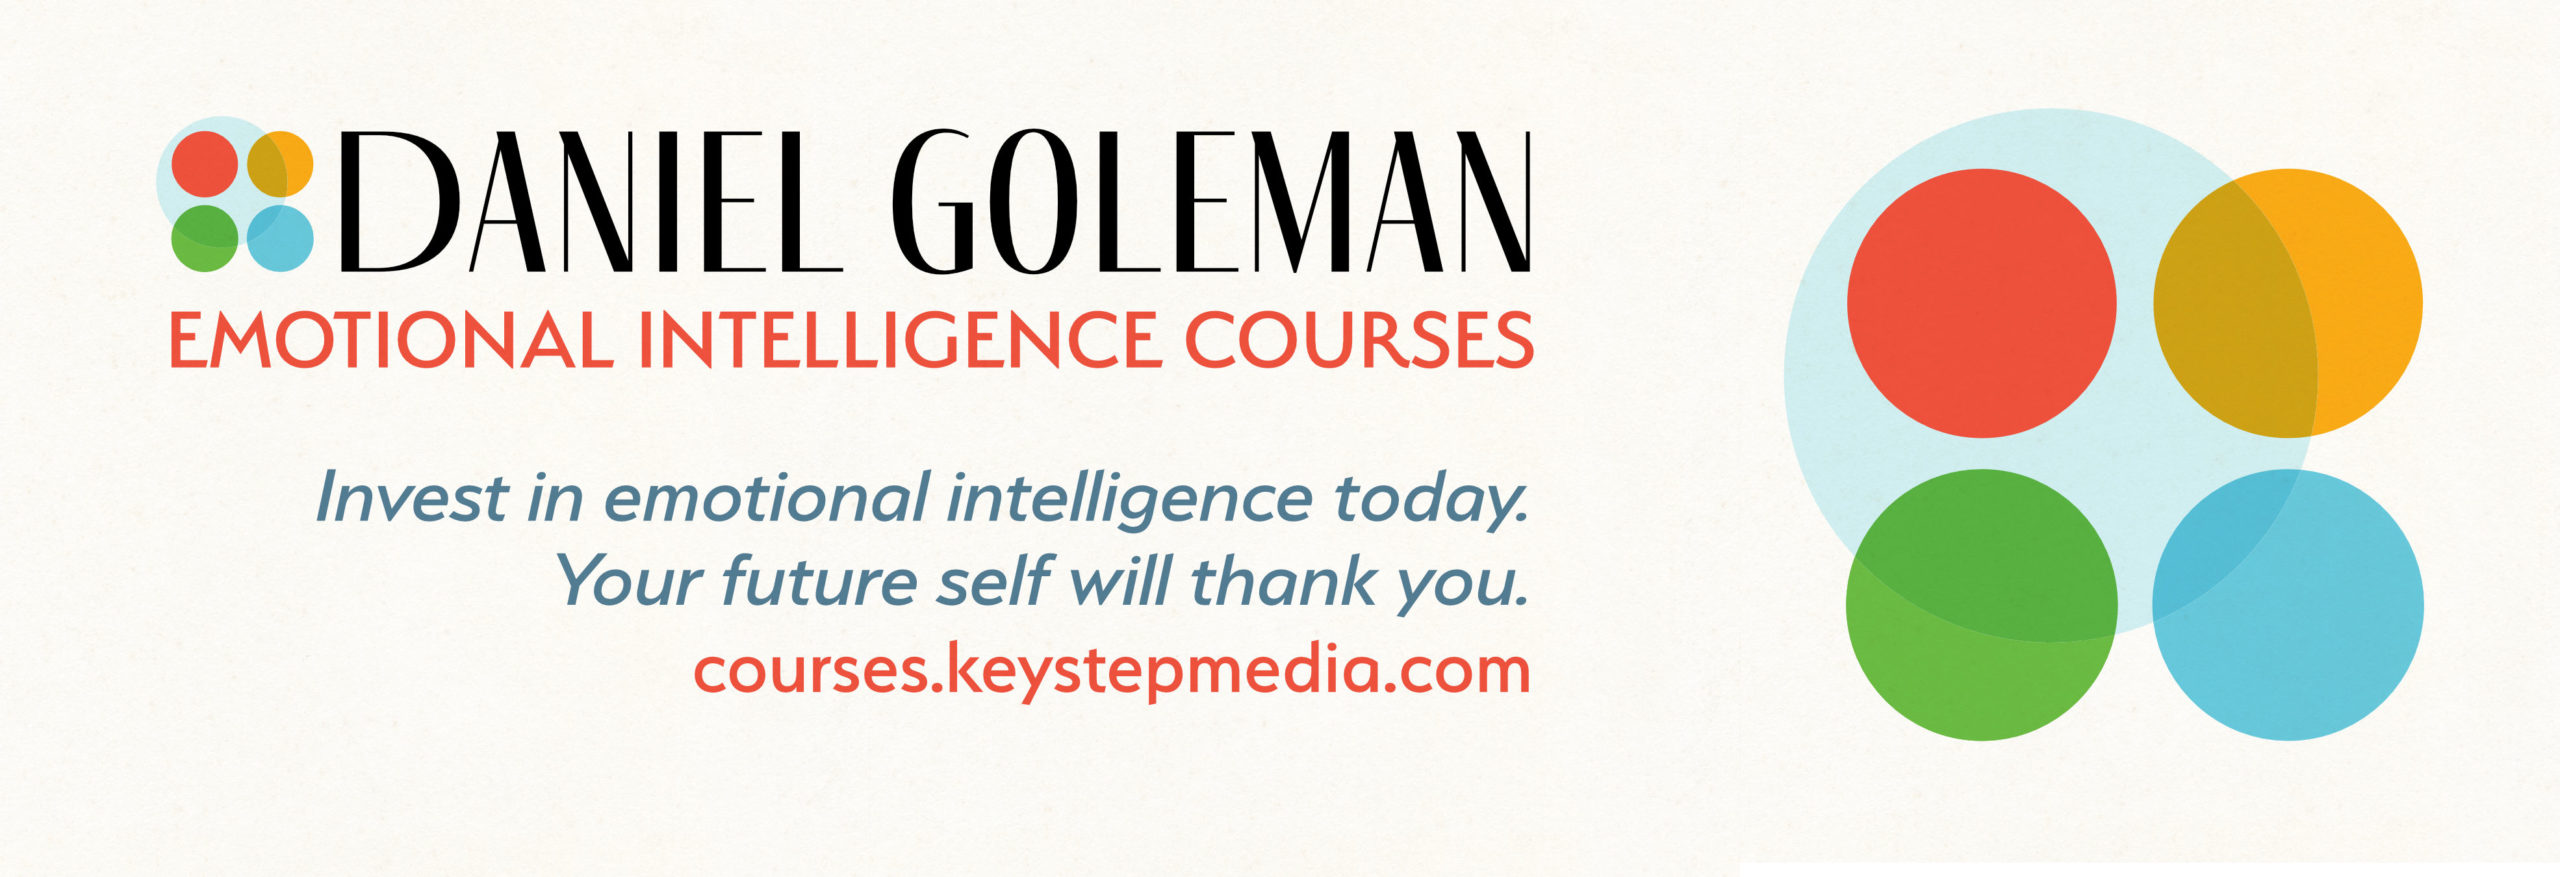 A promotional image for the Daniel Goleman Emotional Intelligence Courses